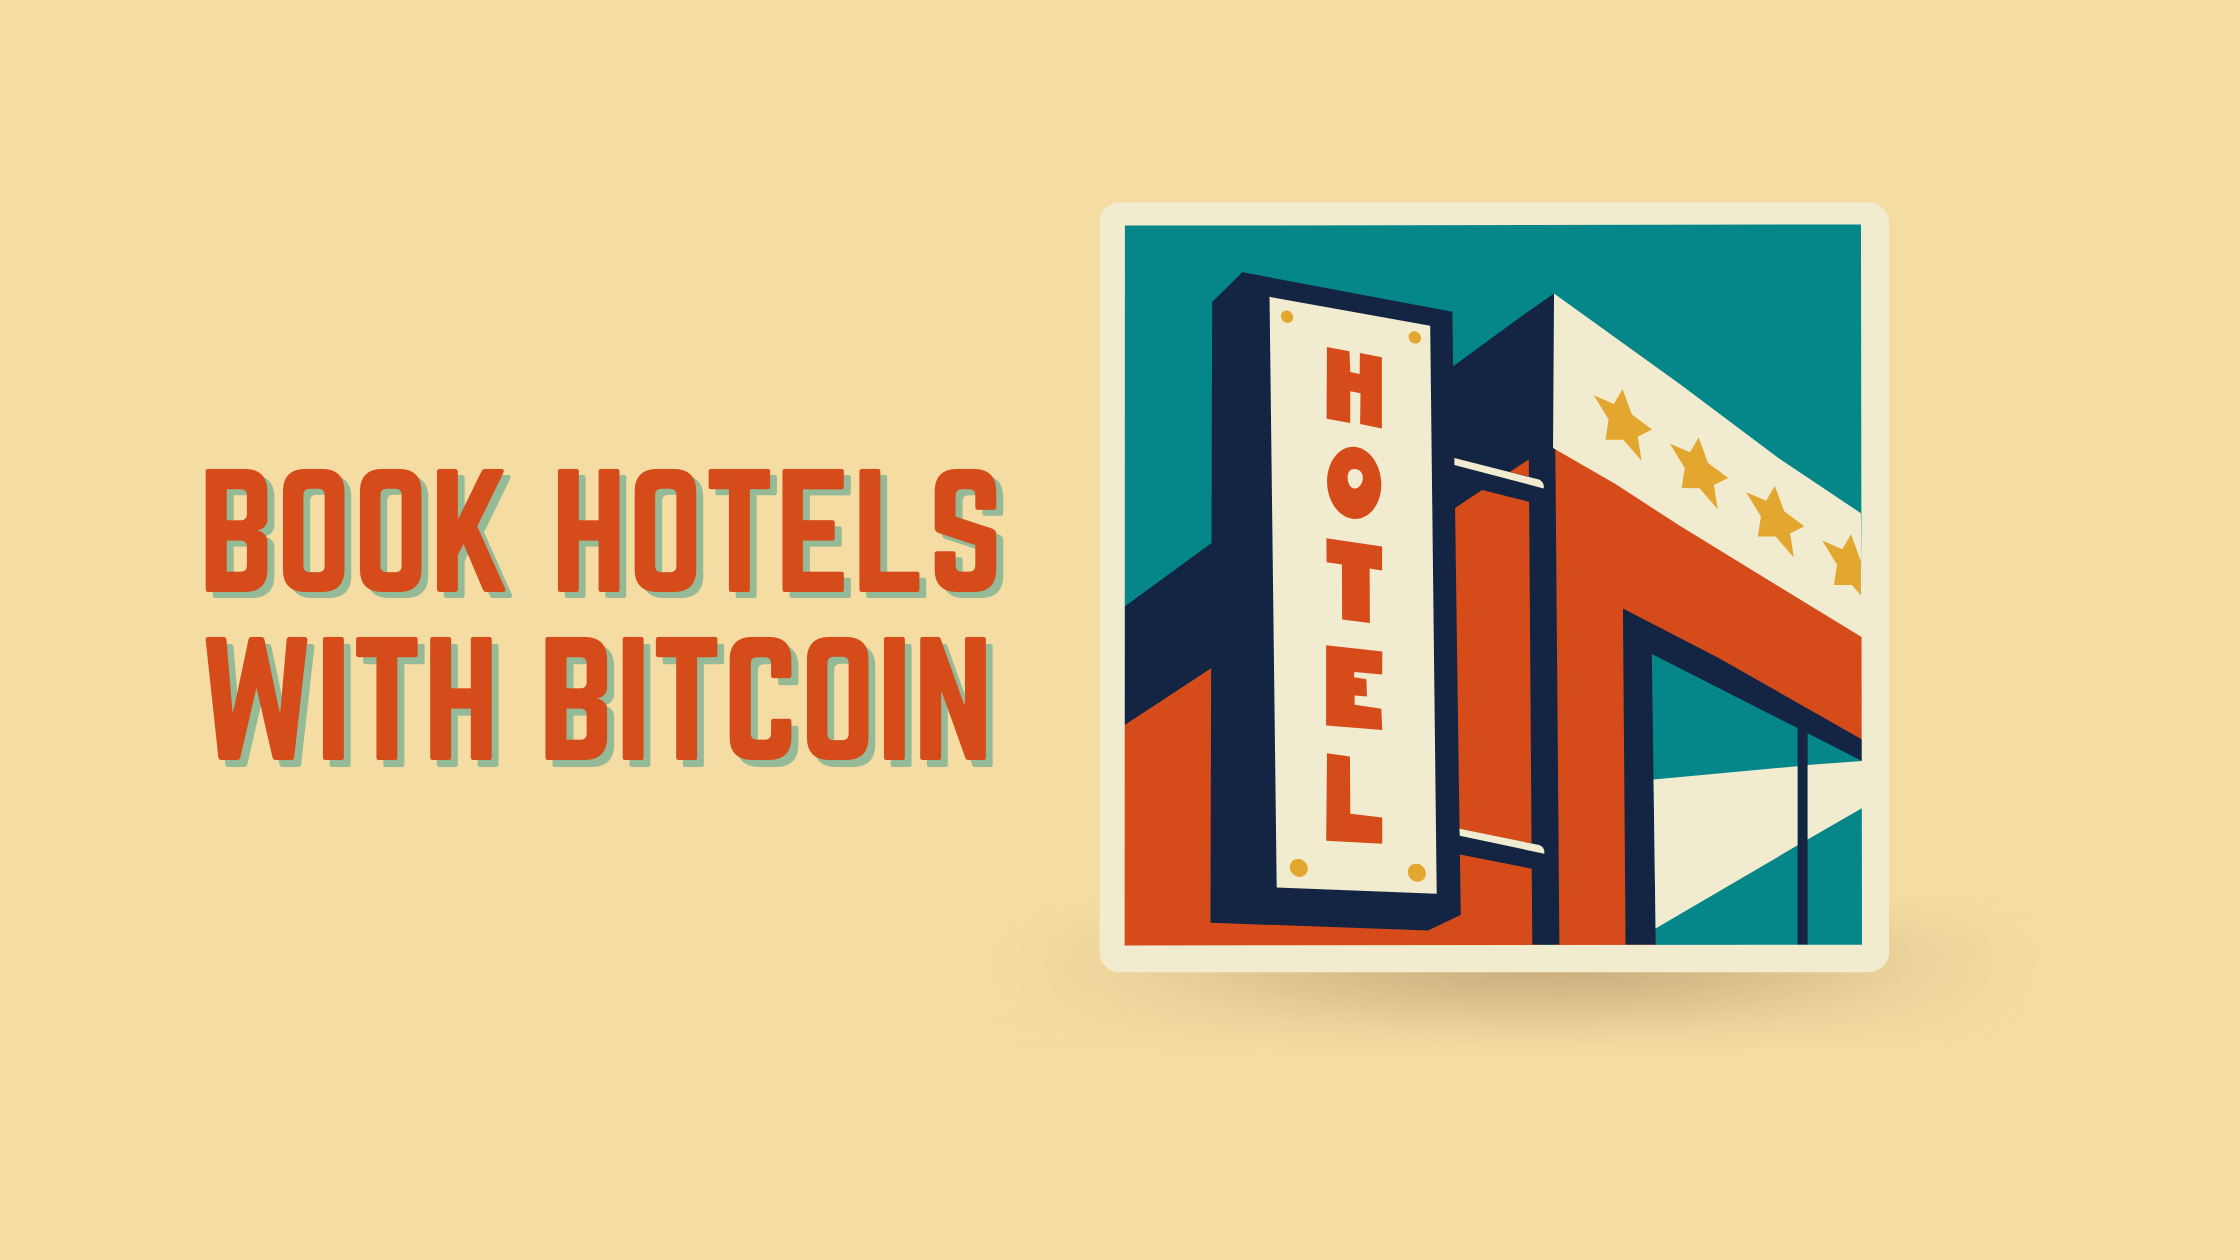 A sign about Hotels that accept bitcoin